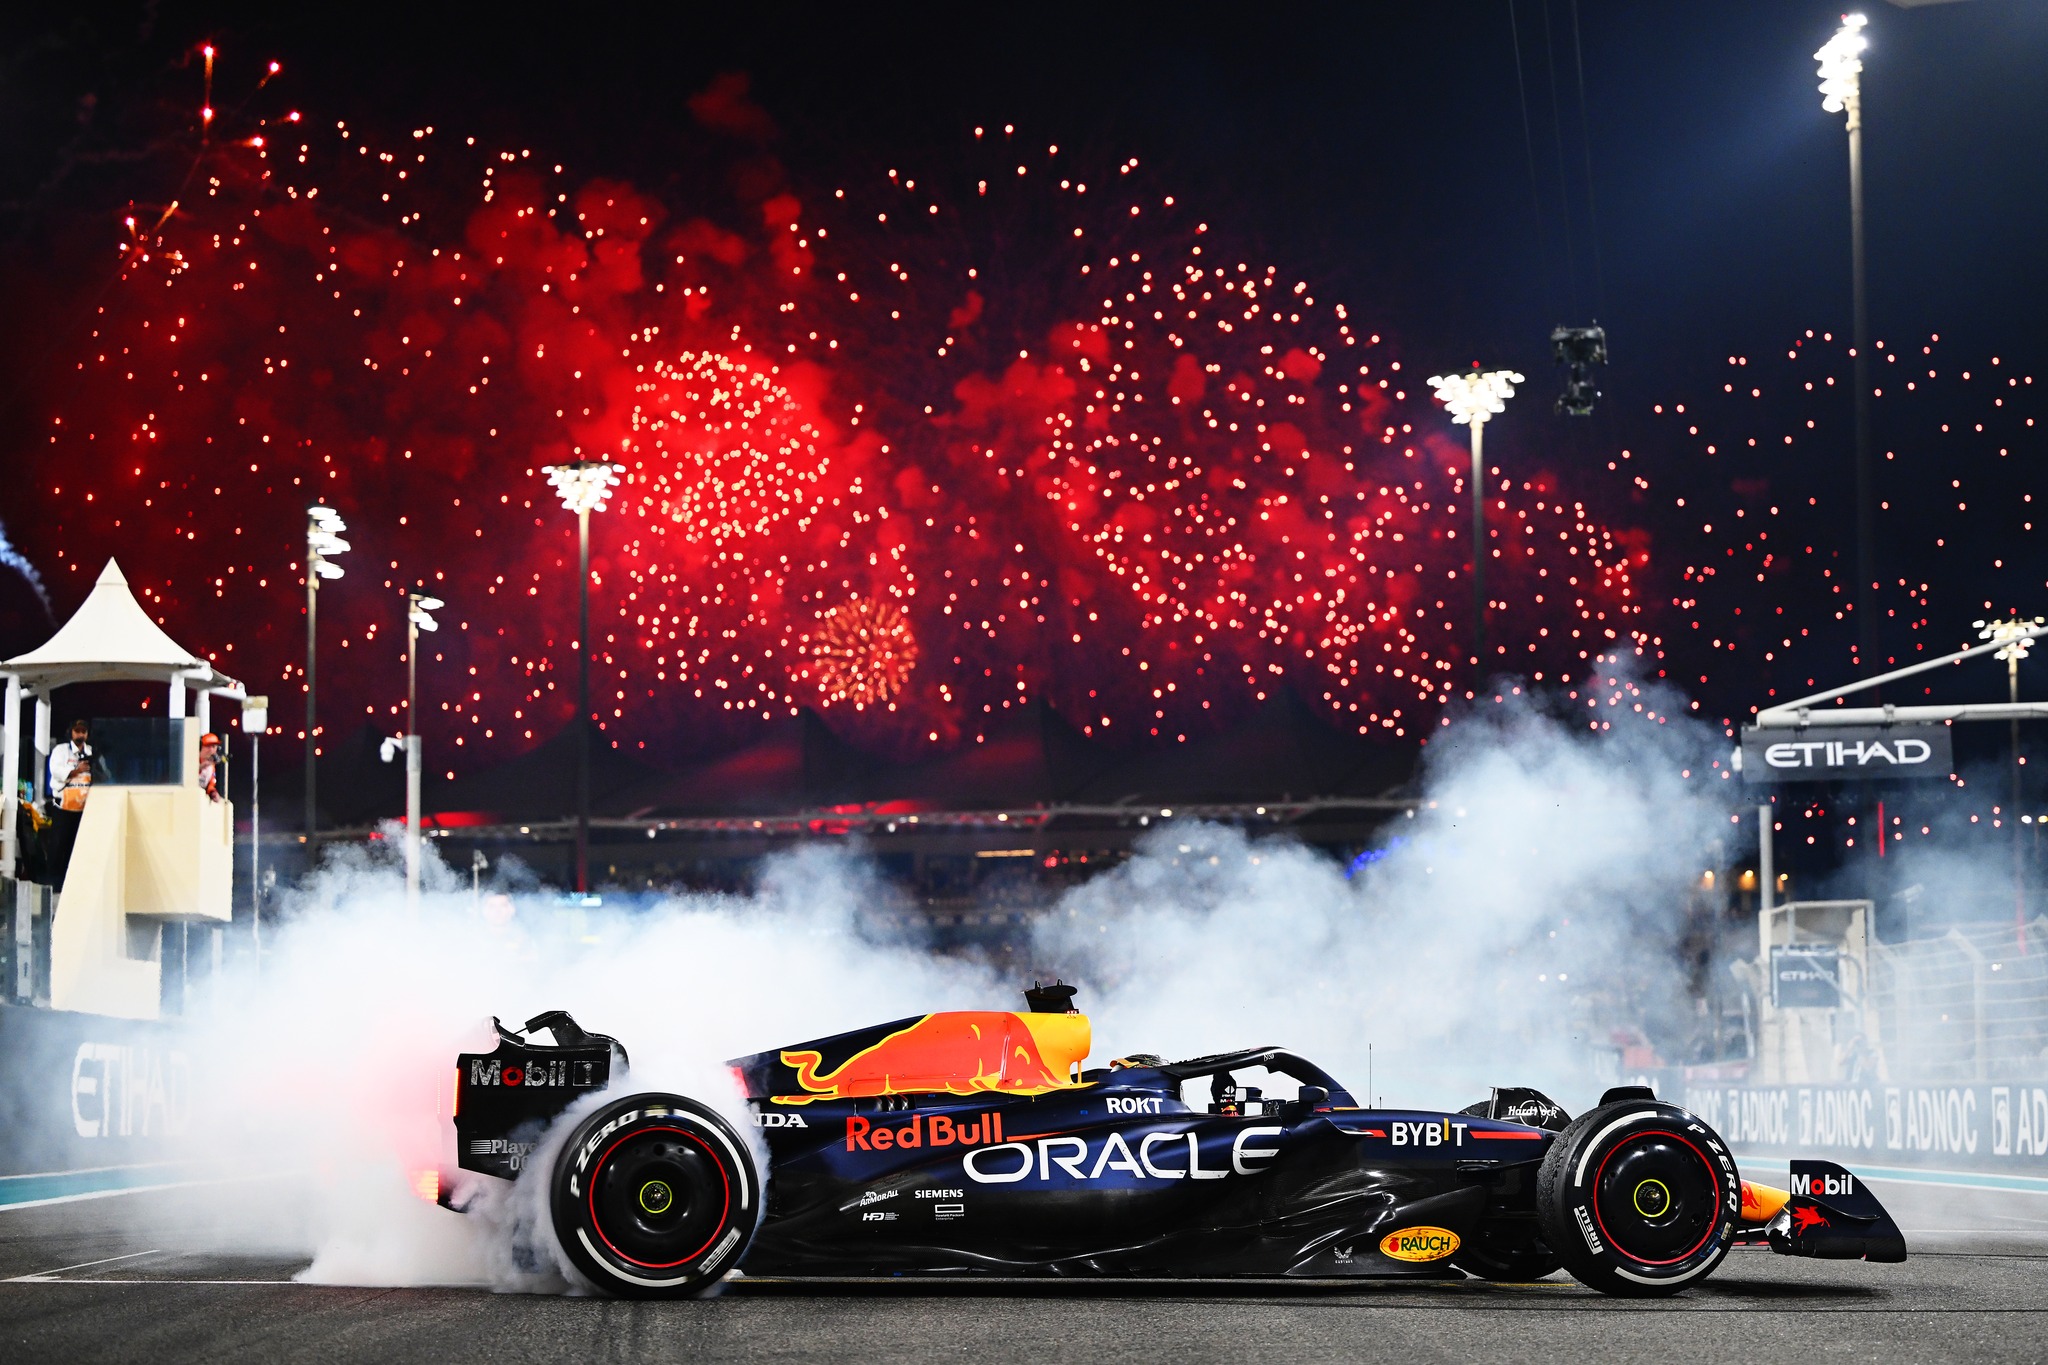 Verstappen looks unstoppable as he enters the F1 break with a